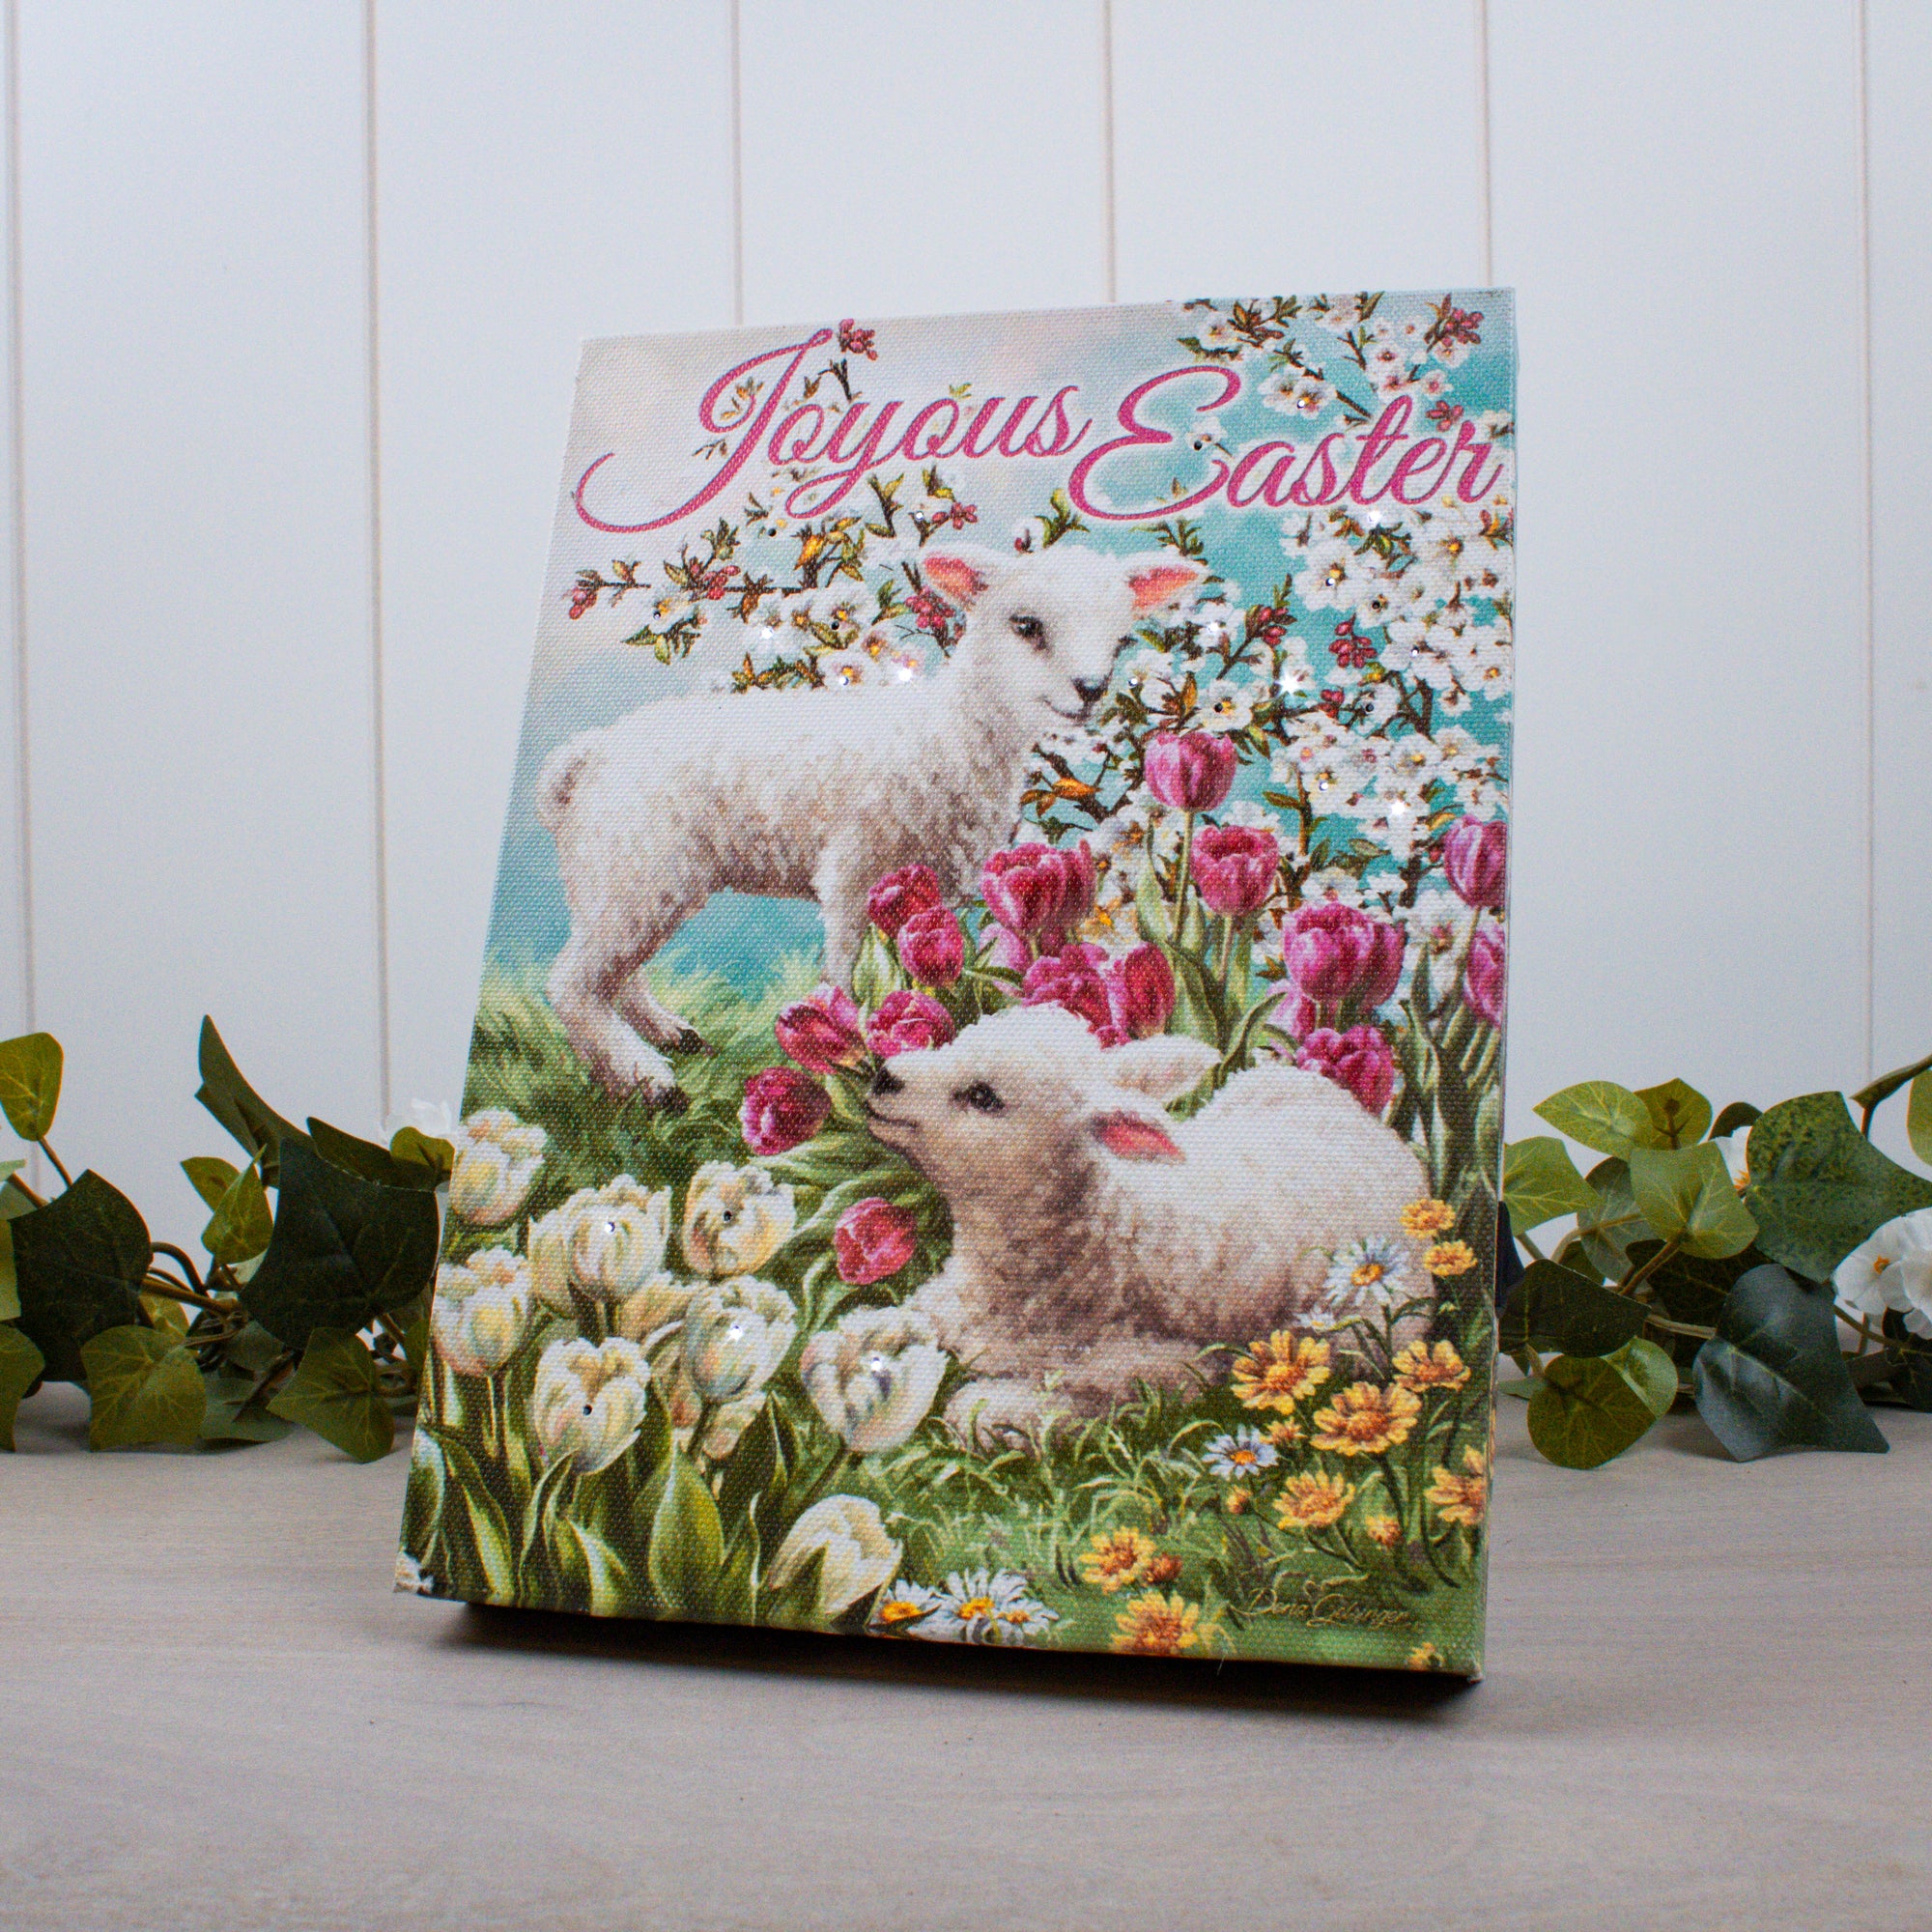 Joyous Easter 8x6 Lighted Tabletop Canvas